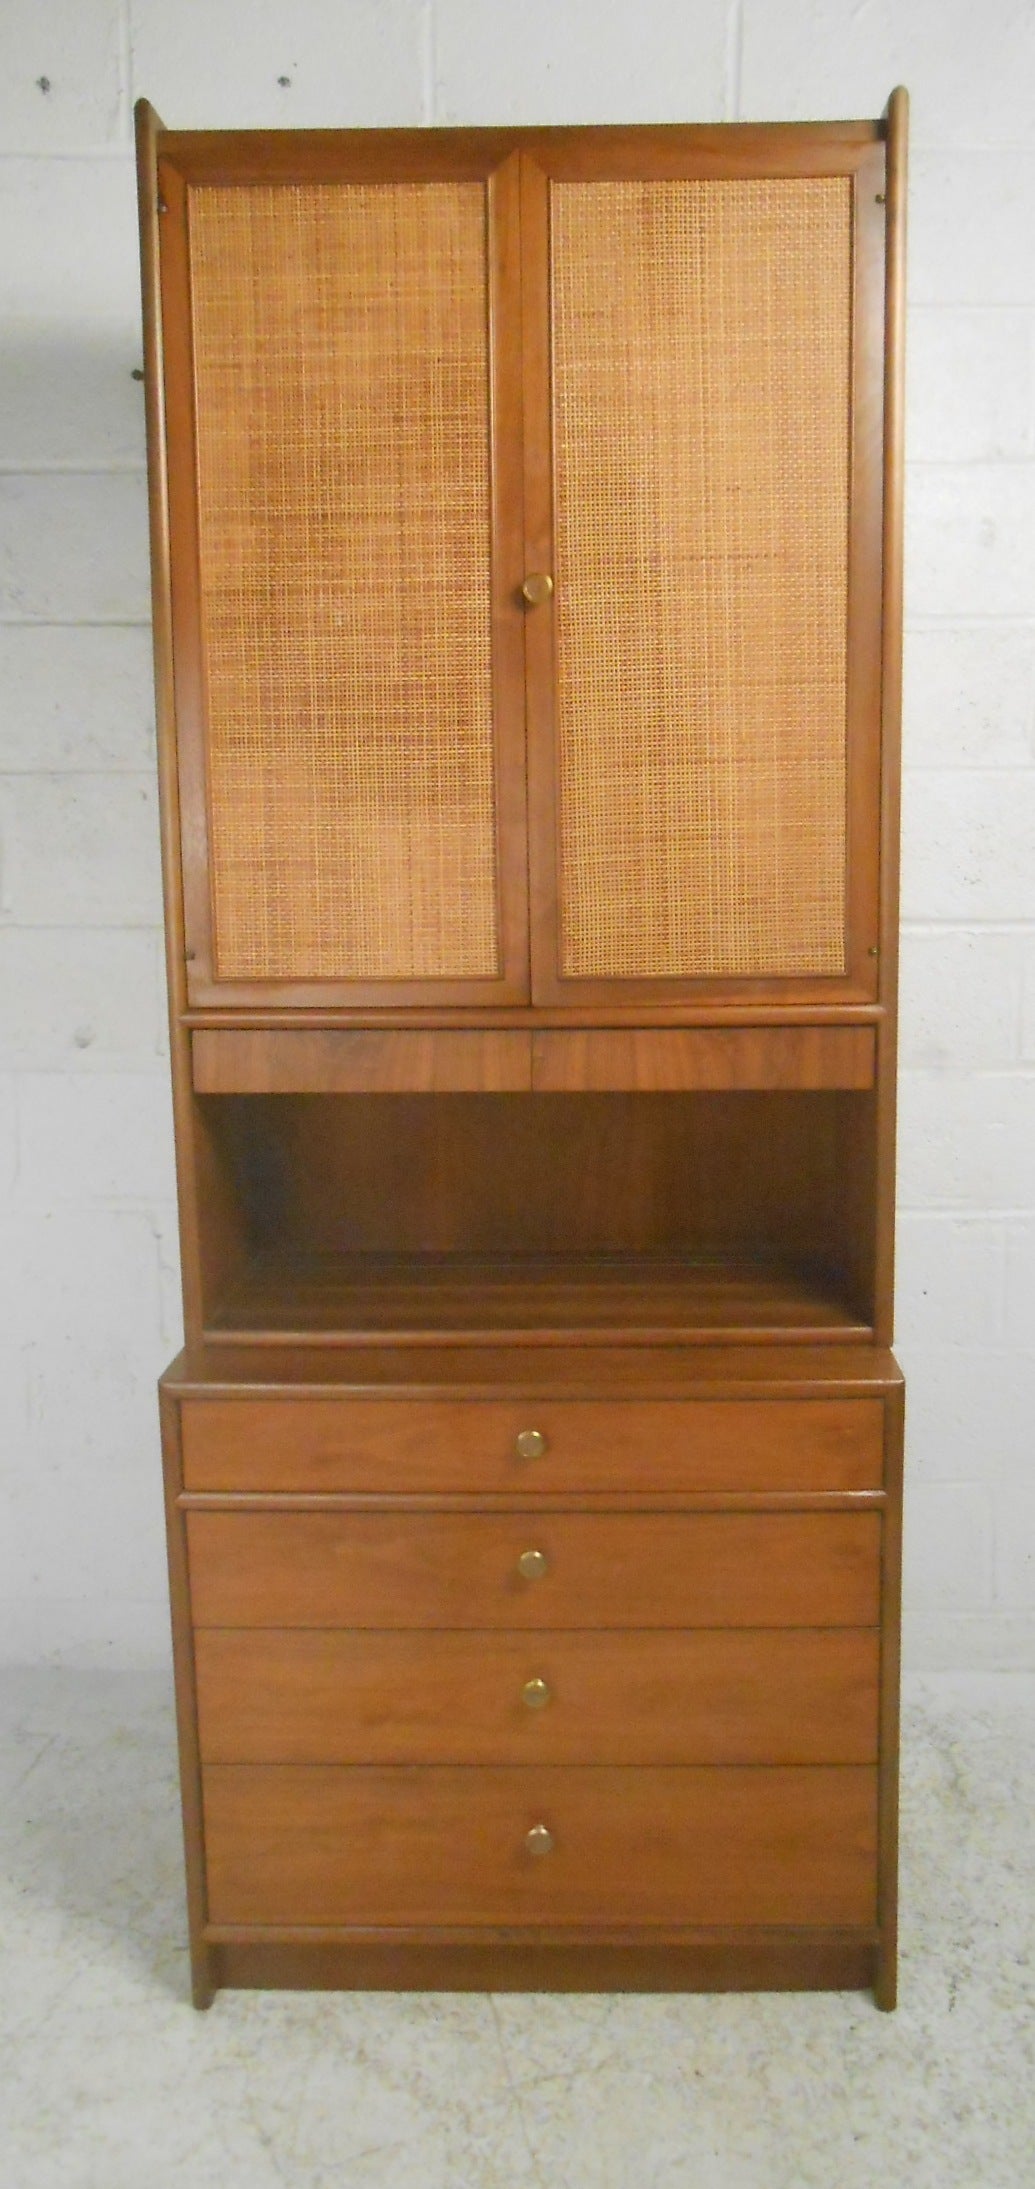 Beautiful Mid-Century two-piece walnut server by Drexel. Woven cane covered doors, adjustable shelves and six drawers provide ample storage options. Please confirm item location (NY or NJ) with dealer.